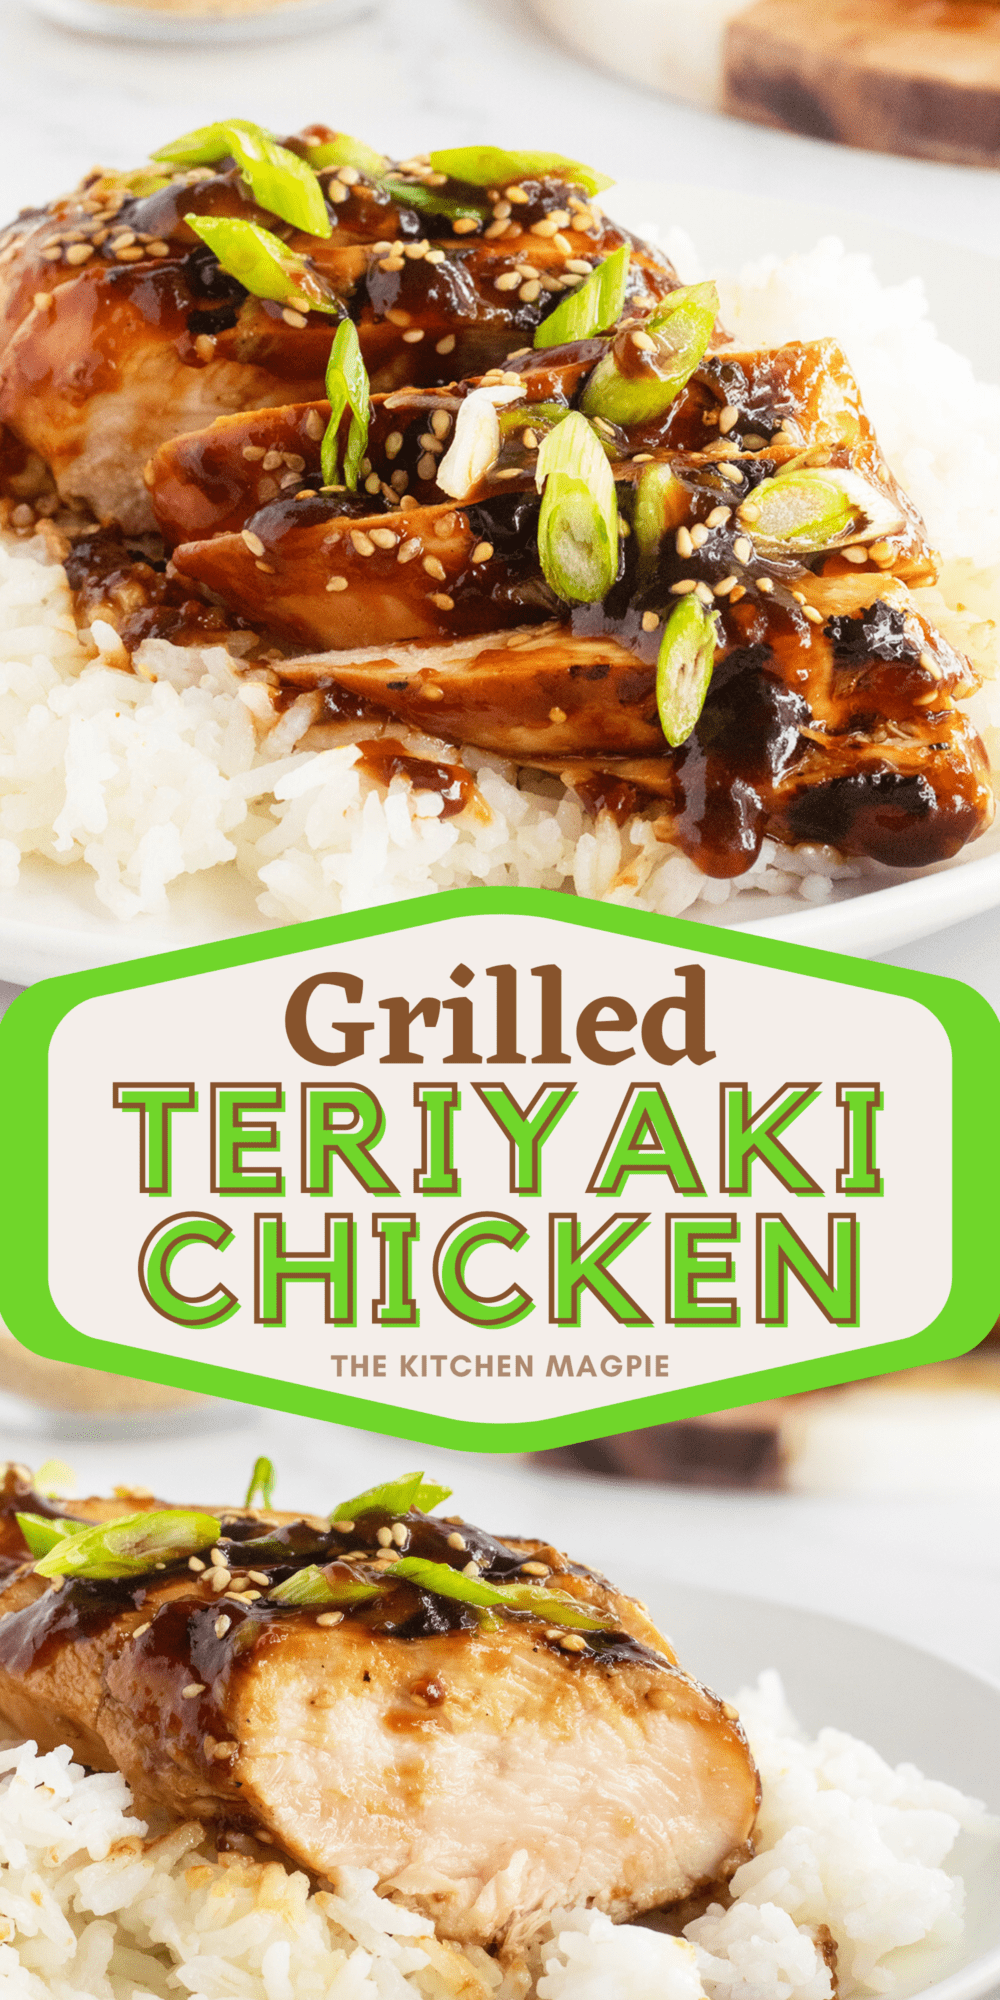 Grilled Teriyaki Chicken is one of the simplest and easiest ways to use your grill. Why not make it even better with a great Teriyaki marinade as well?